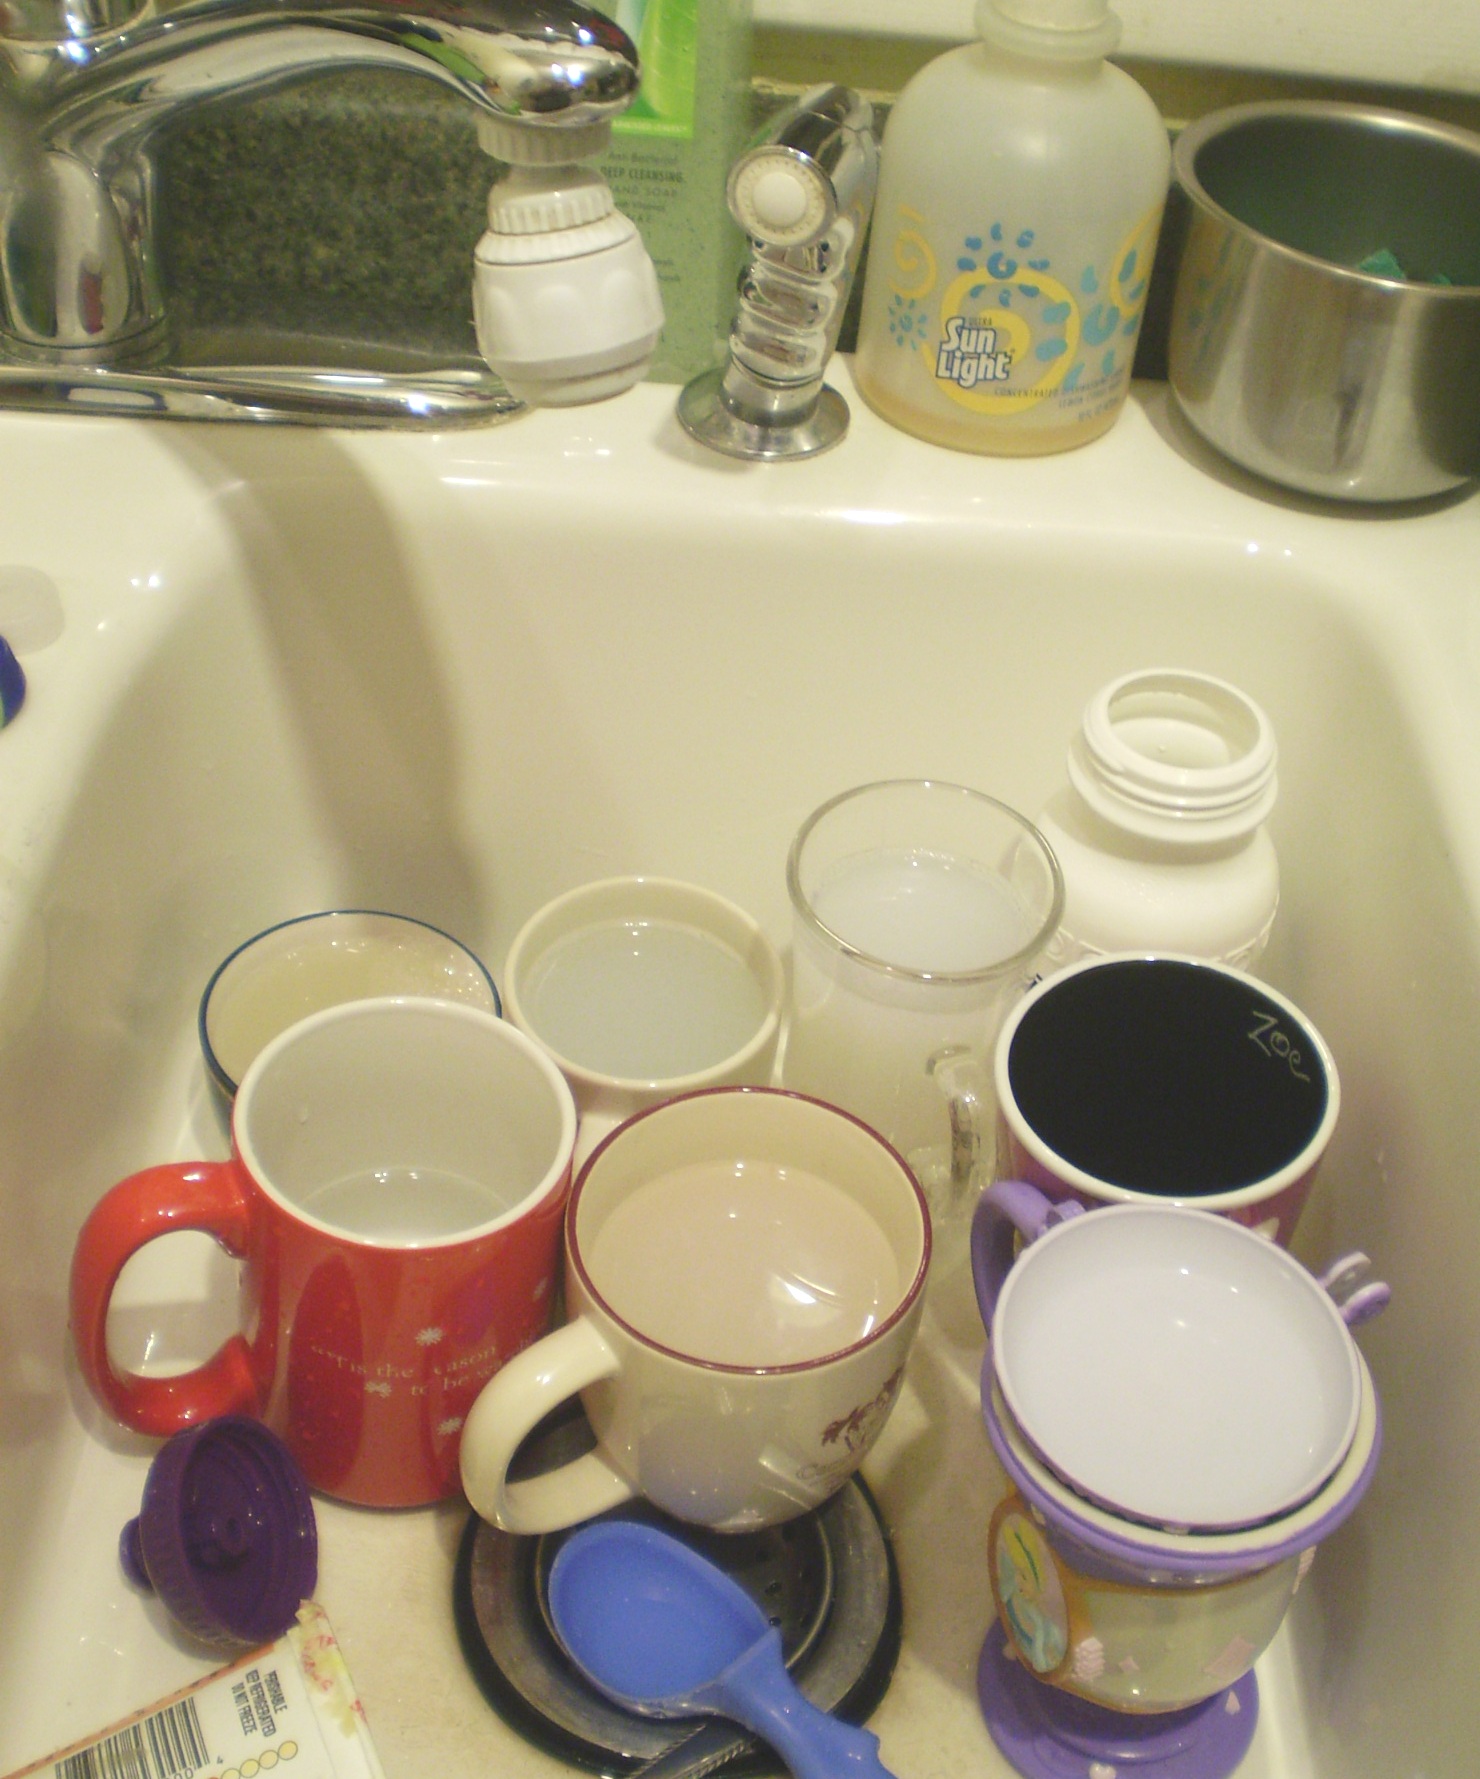 mugs and dishes are sitting in the bathroom sink